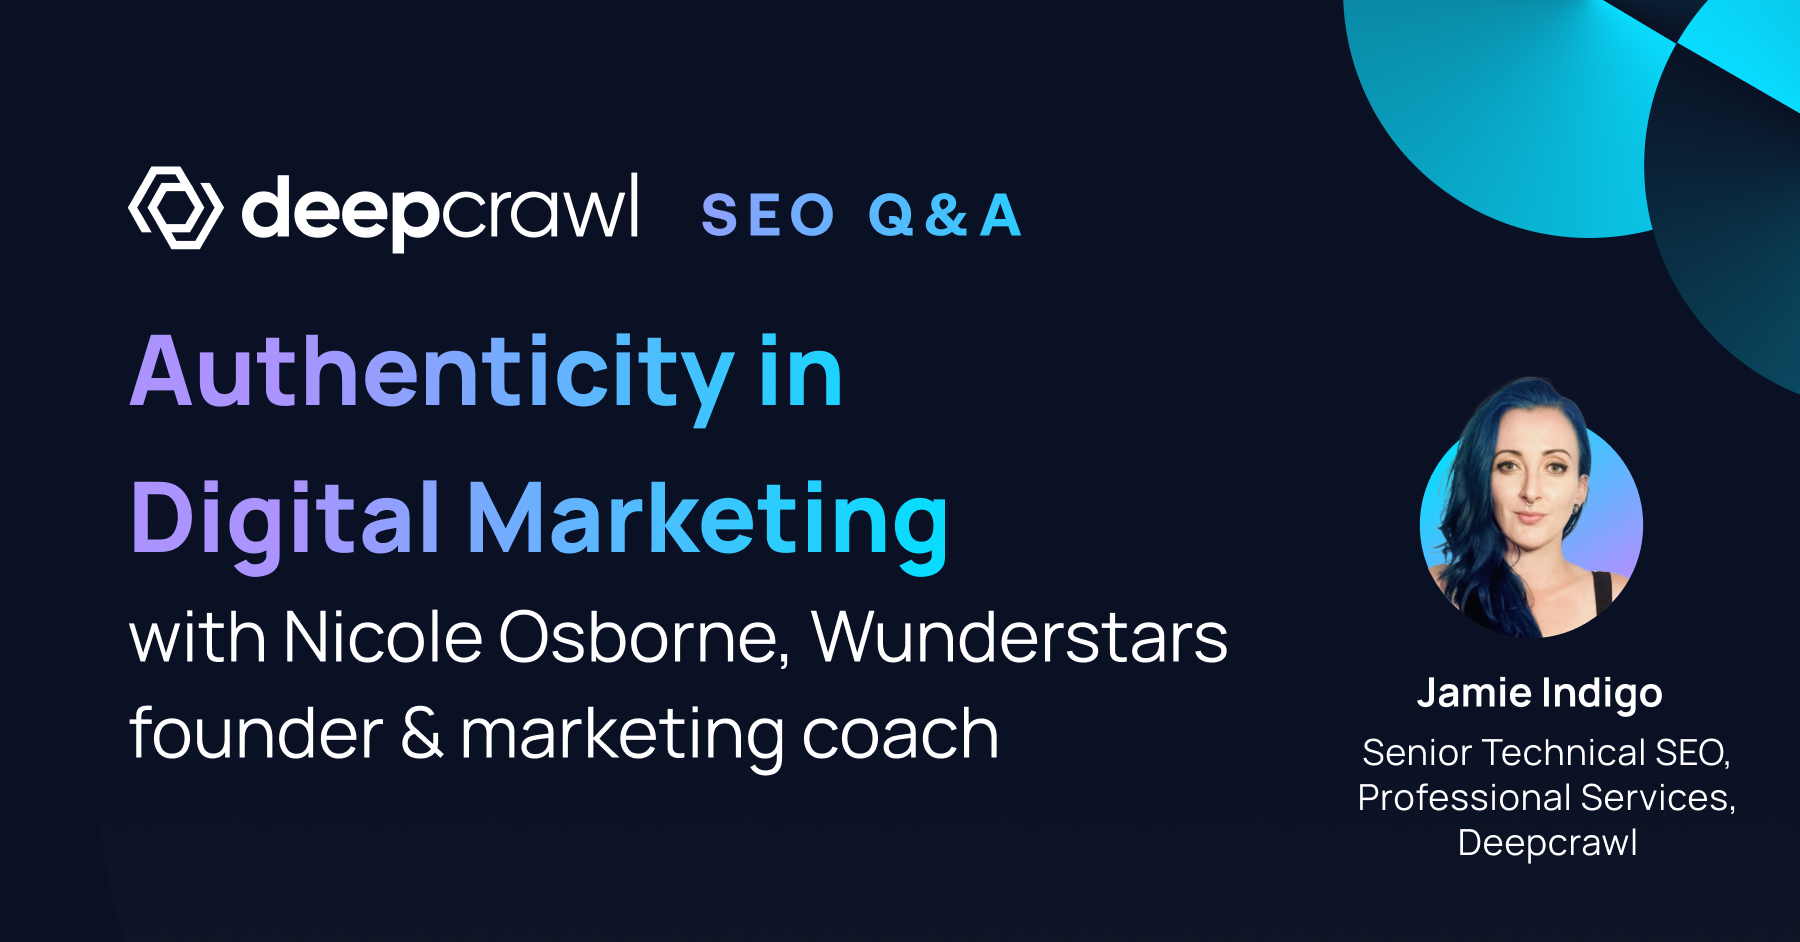 Deepcrawl interview with digital marketers - being more authentic in digital marketing